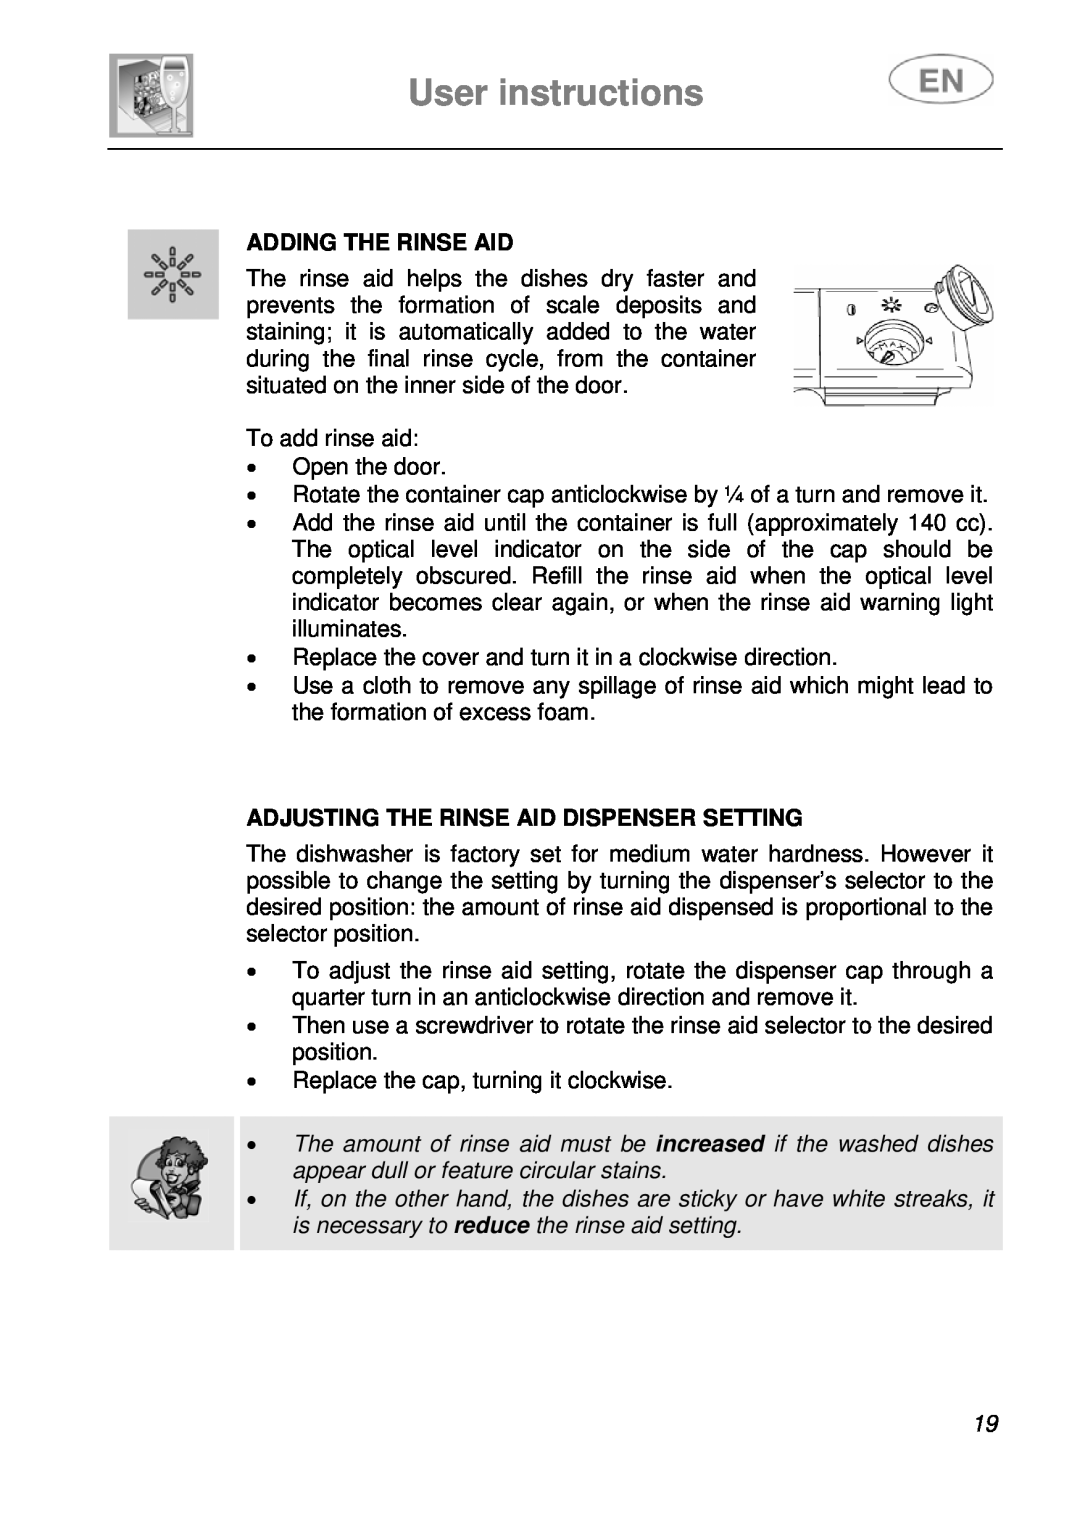 Smeg DI612A1 instruction manual User instructions, Adding The Rinse Aid, Adjusting The Rinse Aid Dispenser Setting 